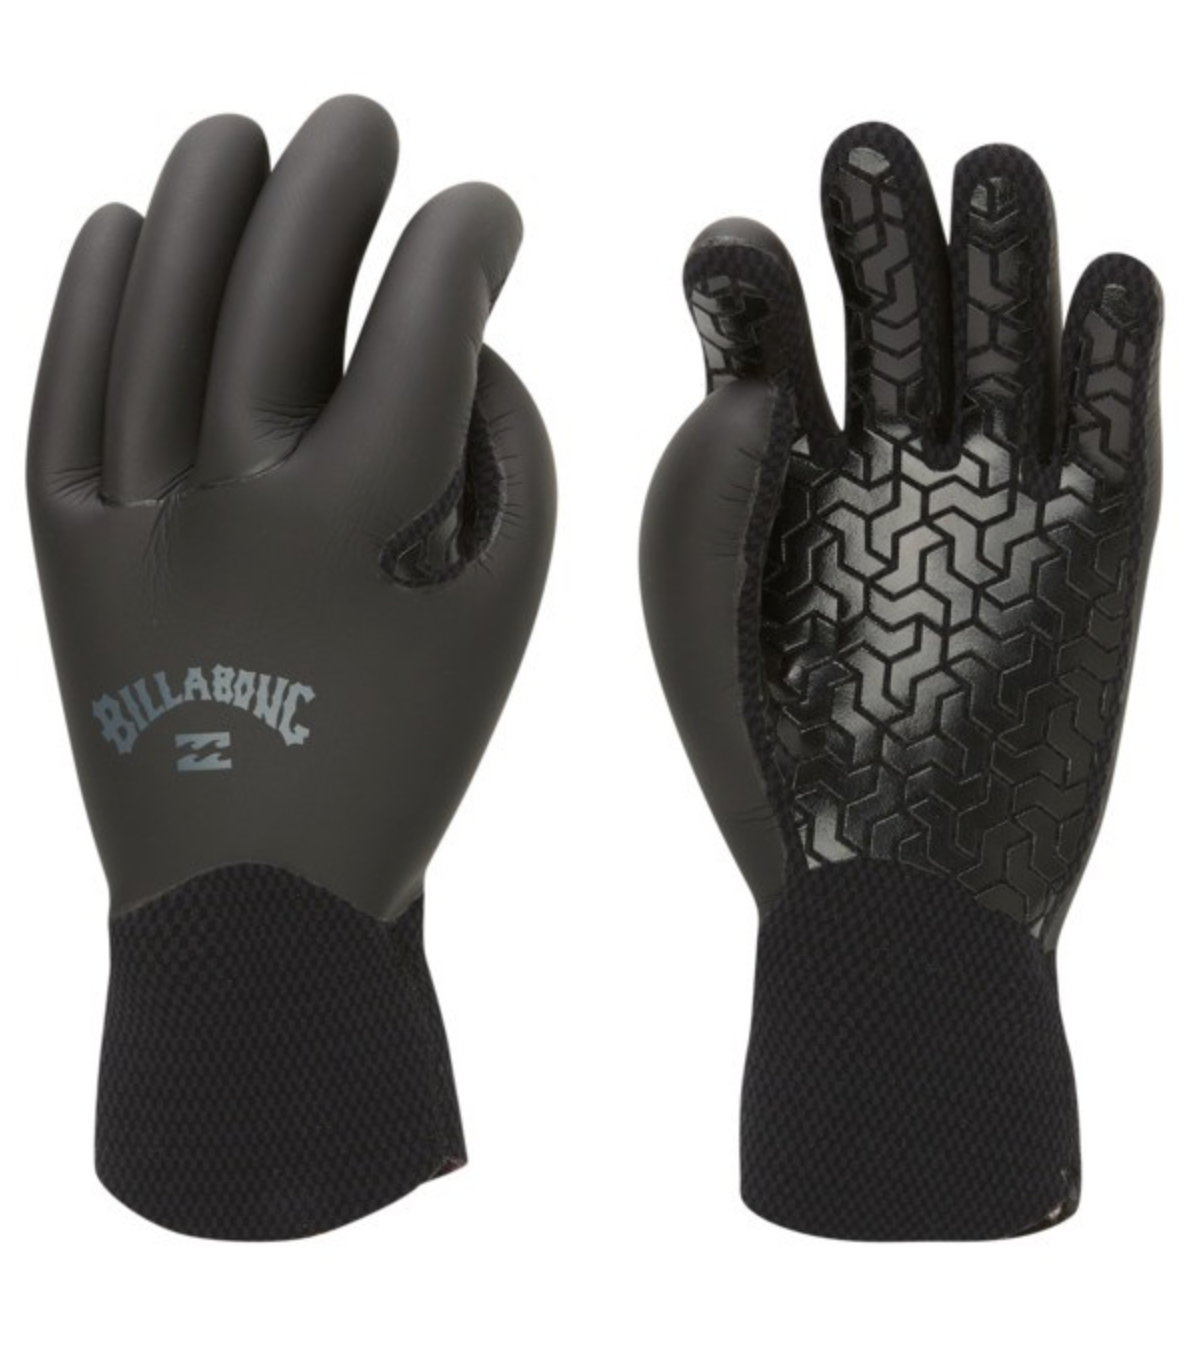 3mm Furnace Wetsuit Gloves